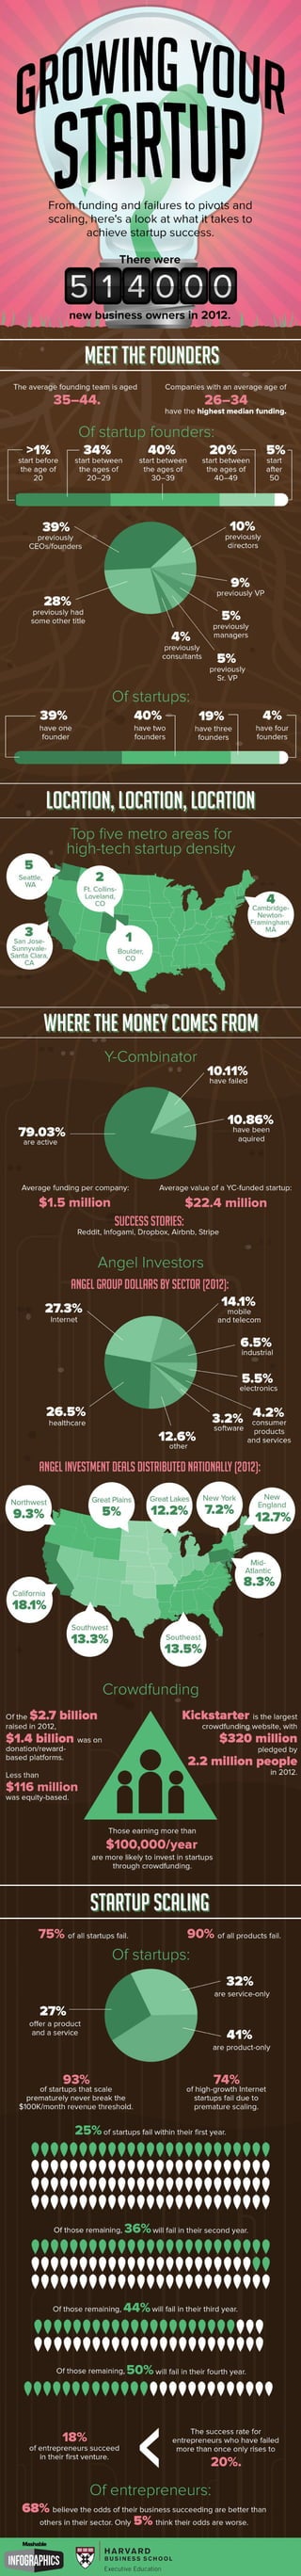 Startup Success By the Numbers